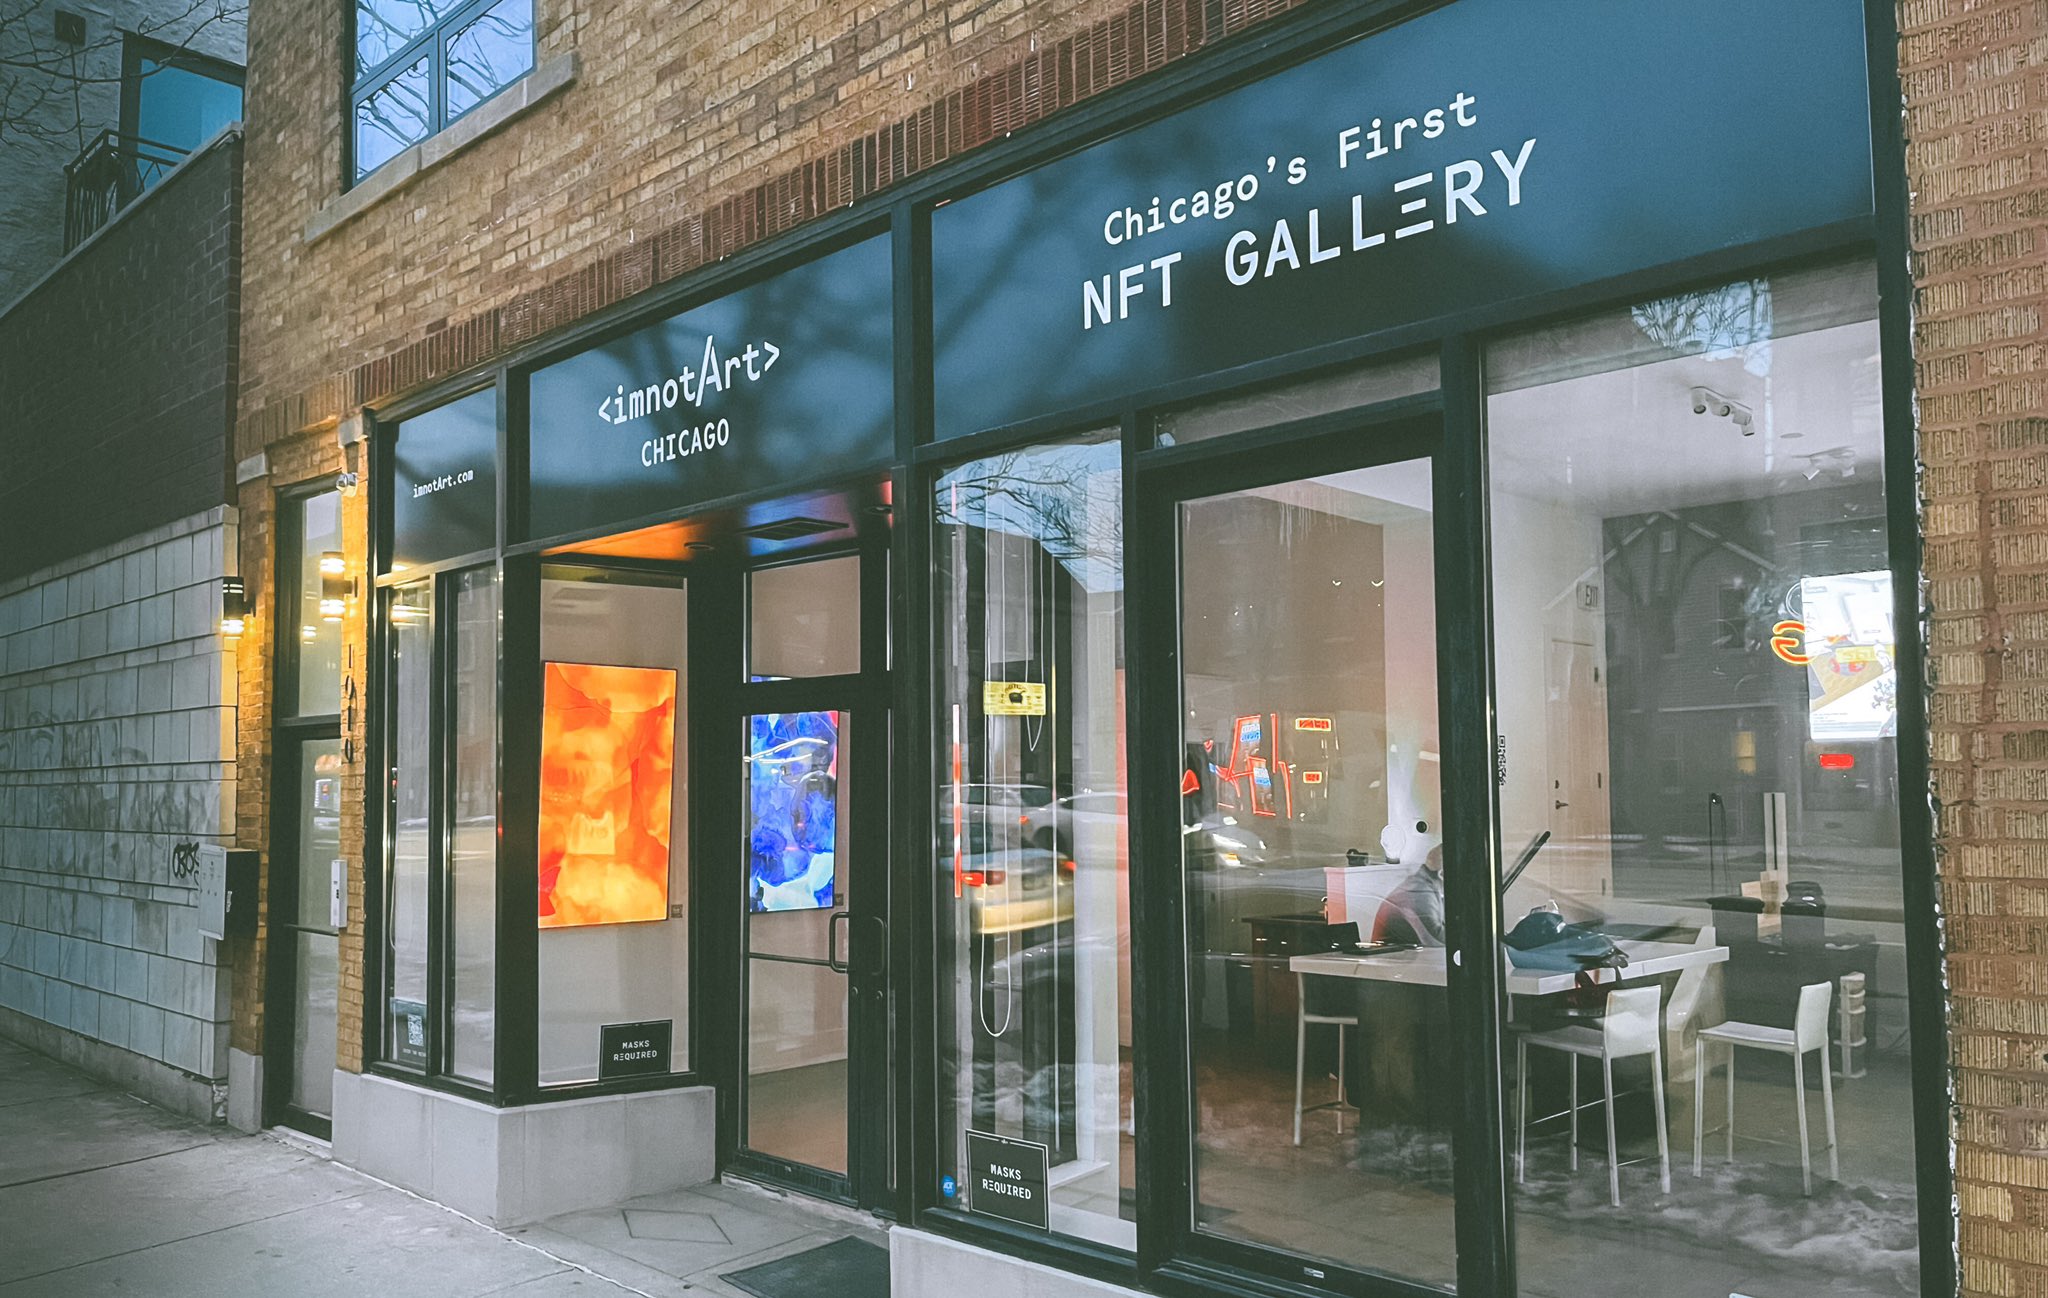 A storefront with signage that reads imnotArt Chicago's first NFT gallery